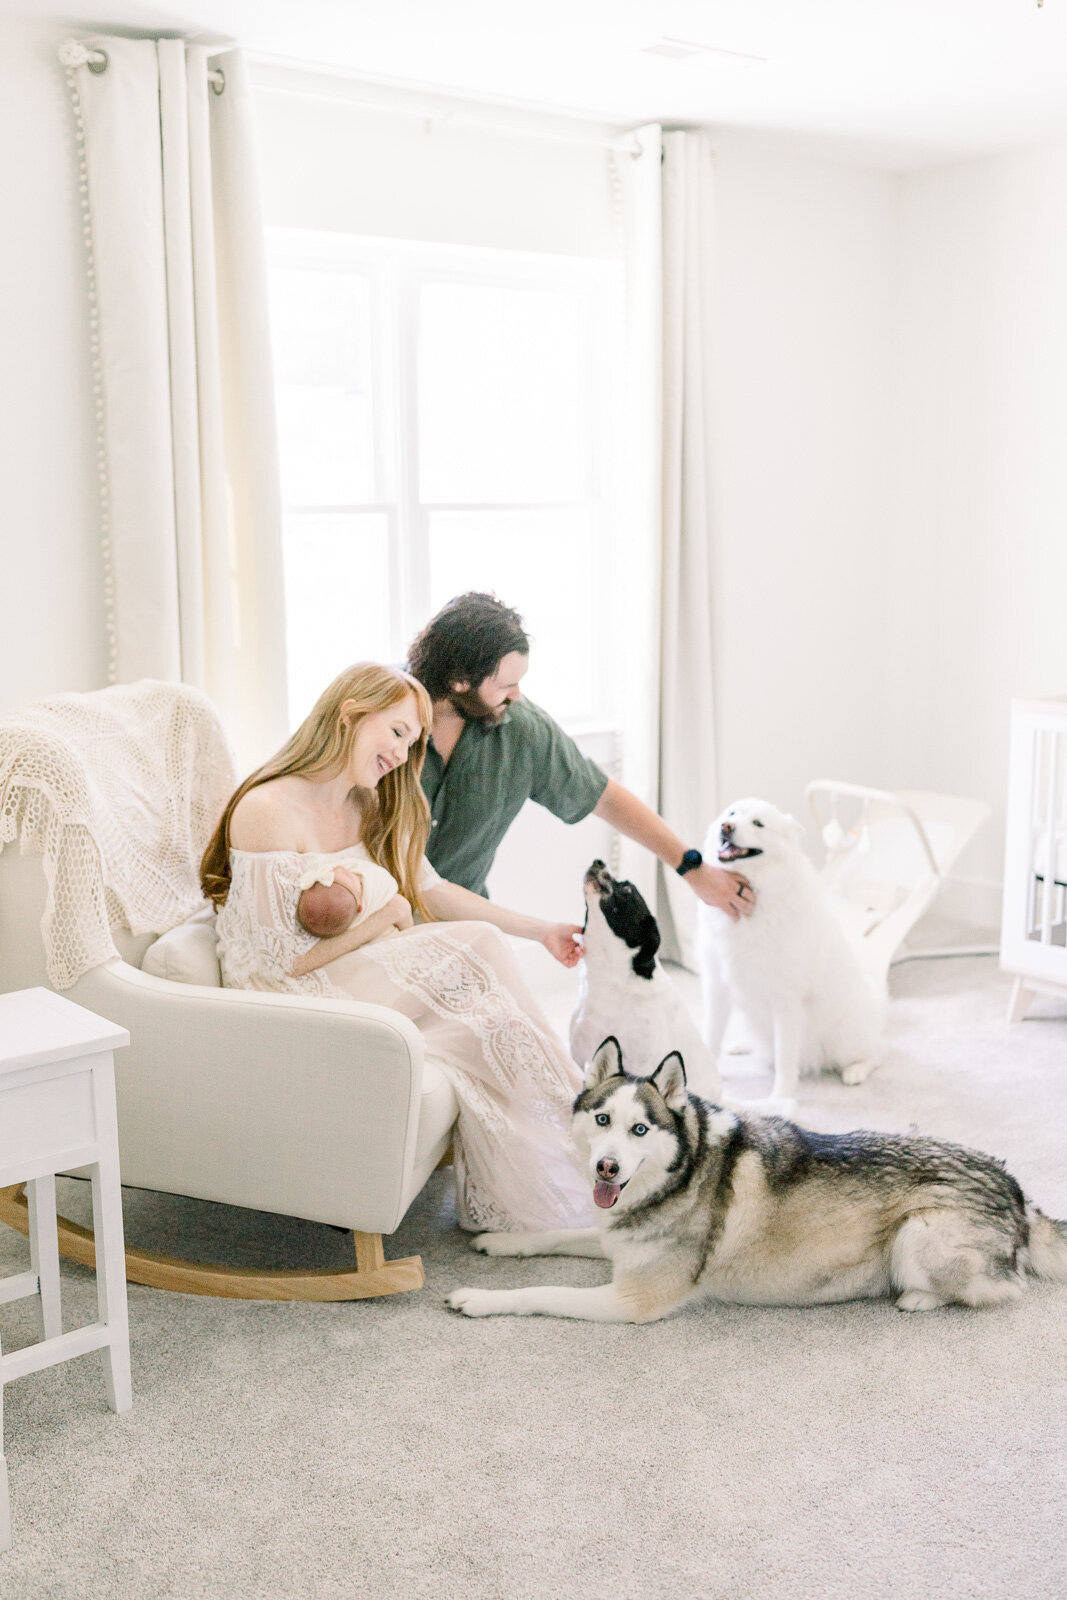 New parents snuggling baby and dogs